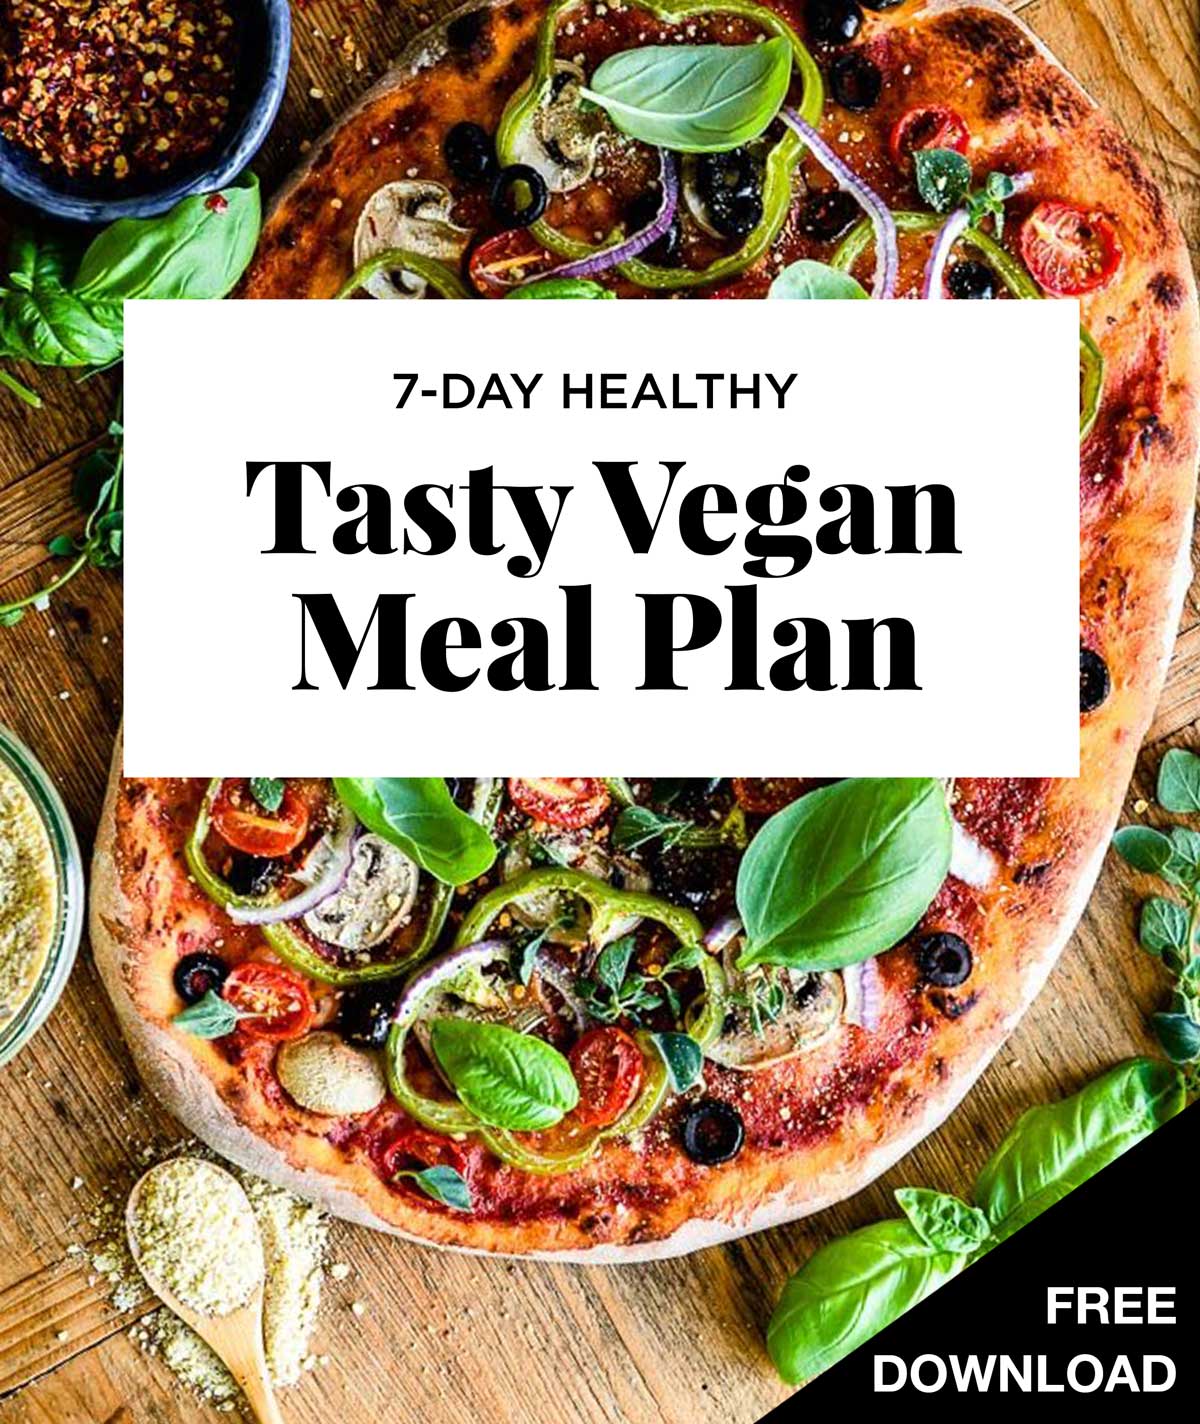 7-Day Healthy Tasty Vegan Meal Plan in black text on a white background, overtop veggie pizza.